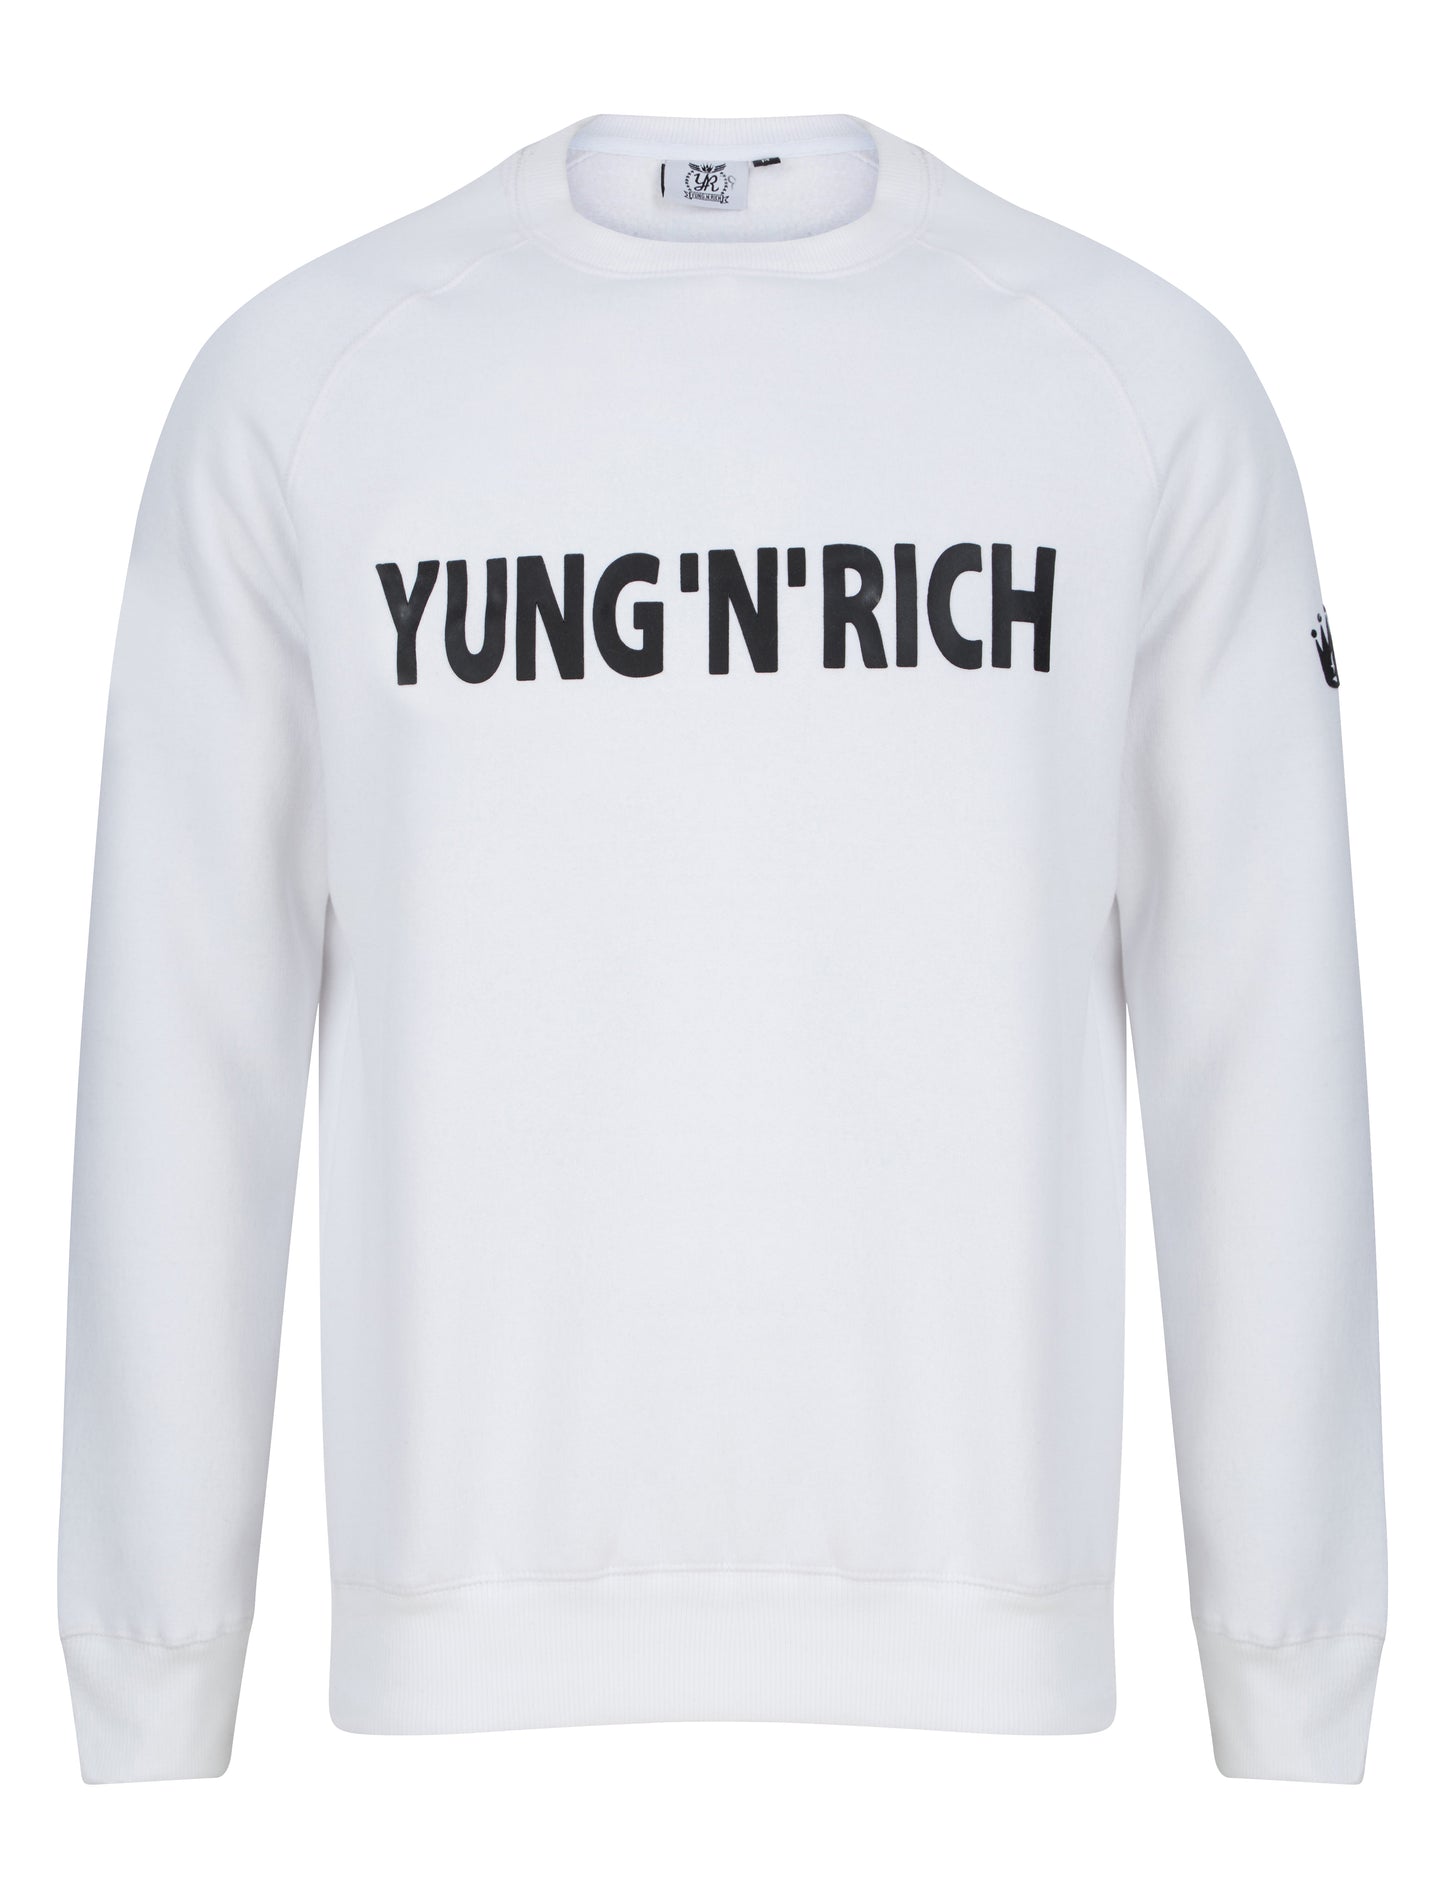 YUNGNRICH JUMPER SWEATER WHITE BLACK WORDING Apparel & Accessories > Clothing > hoodie > jumper > sweater